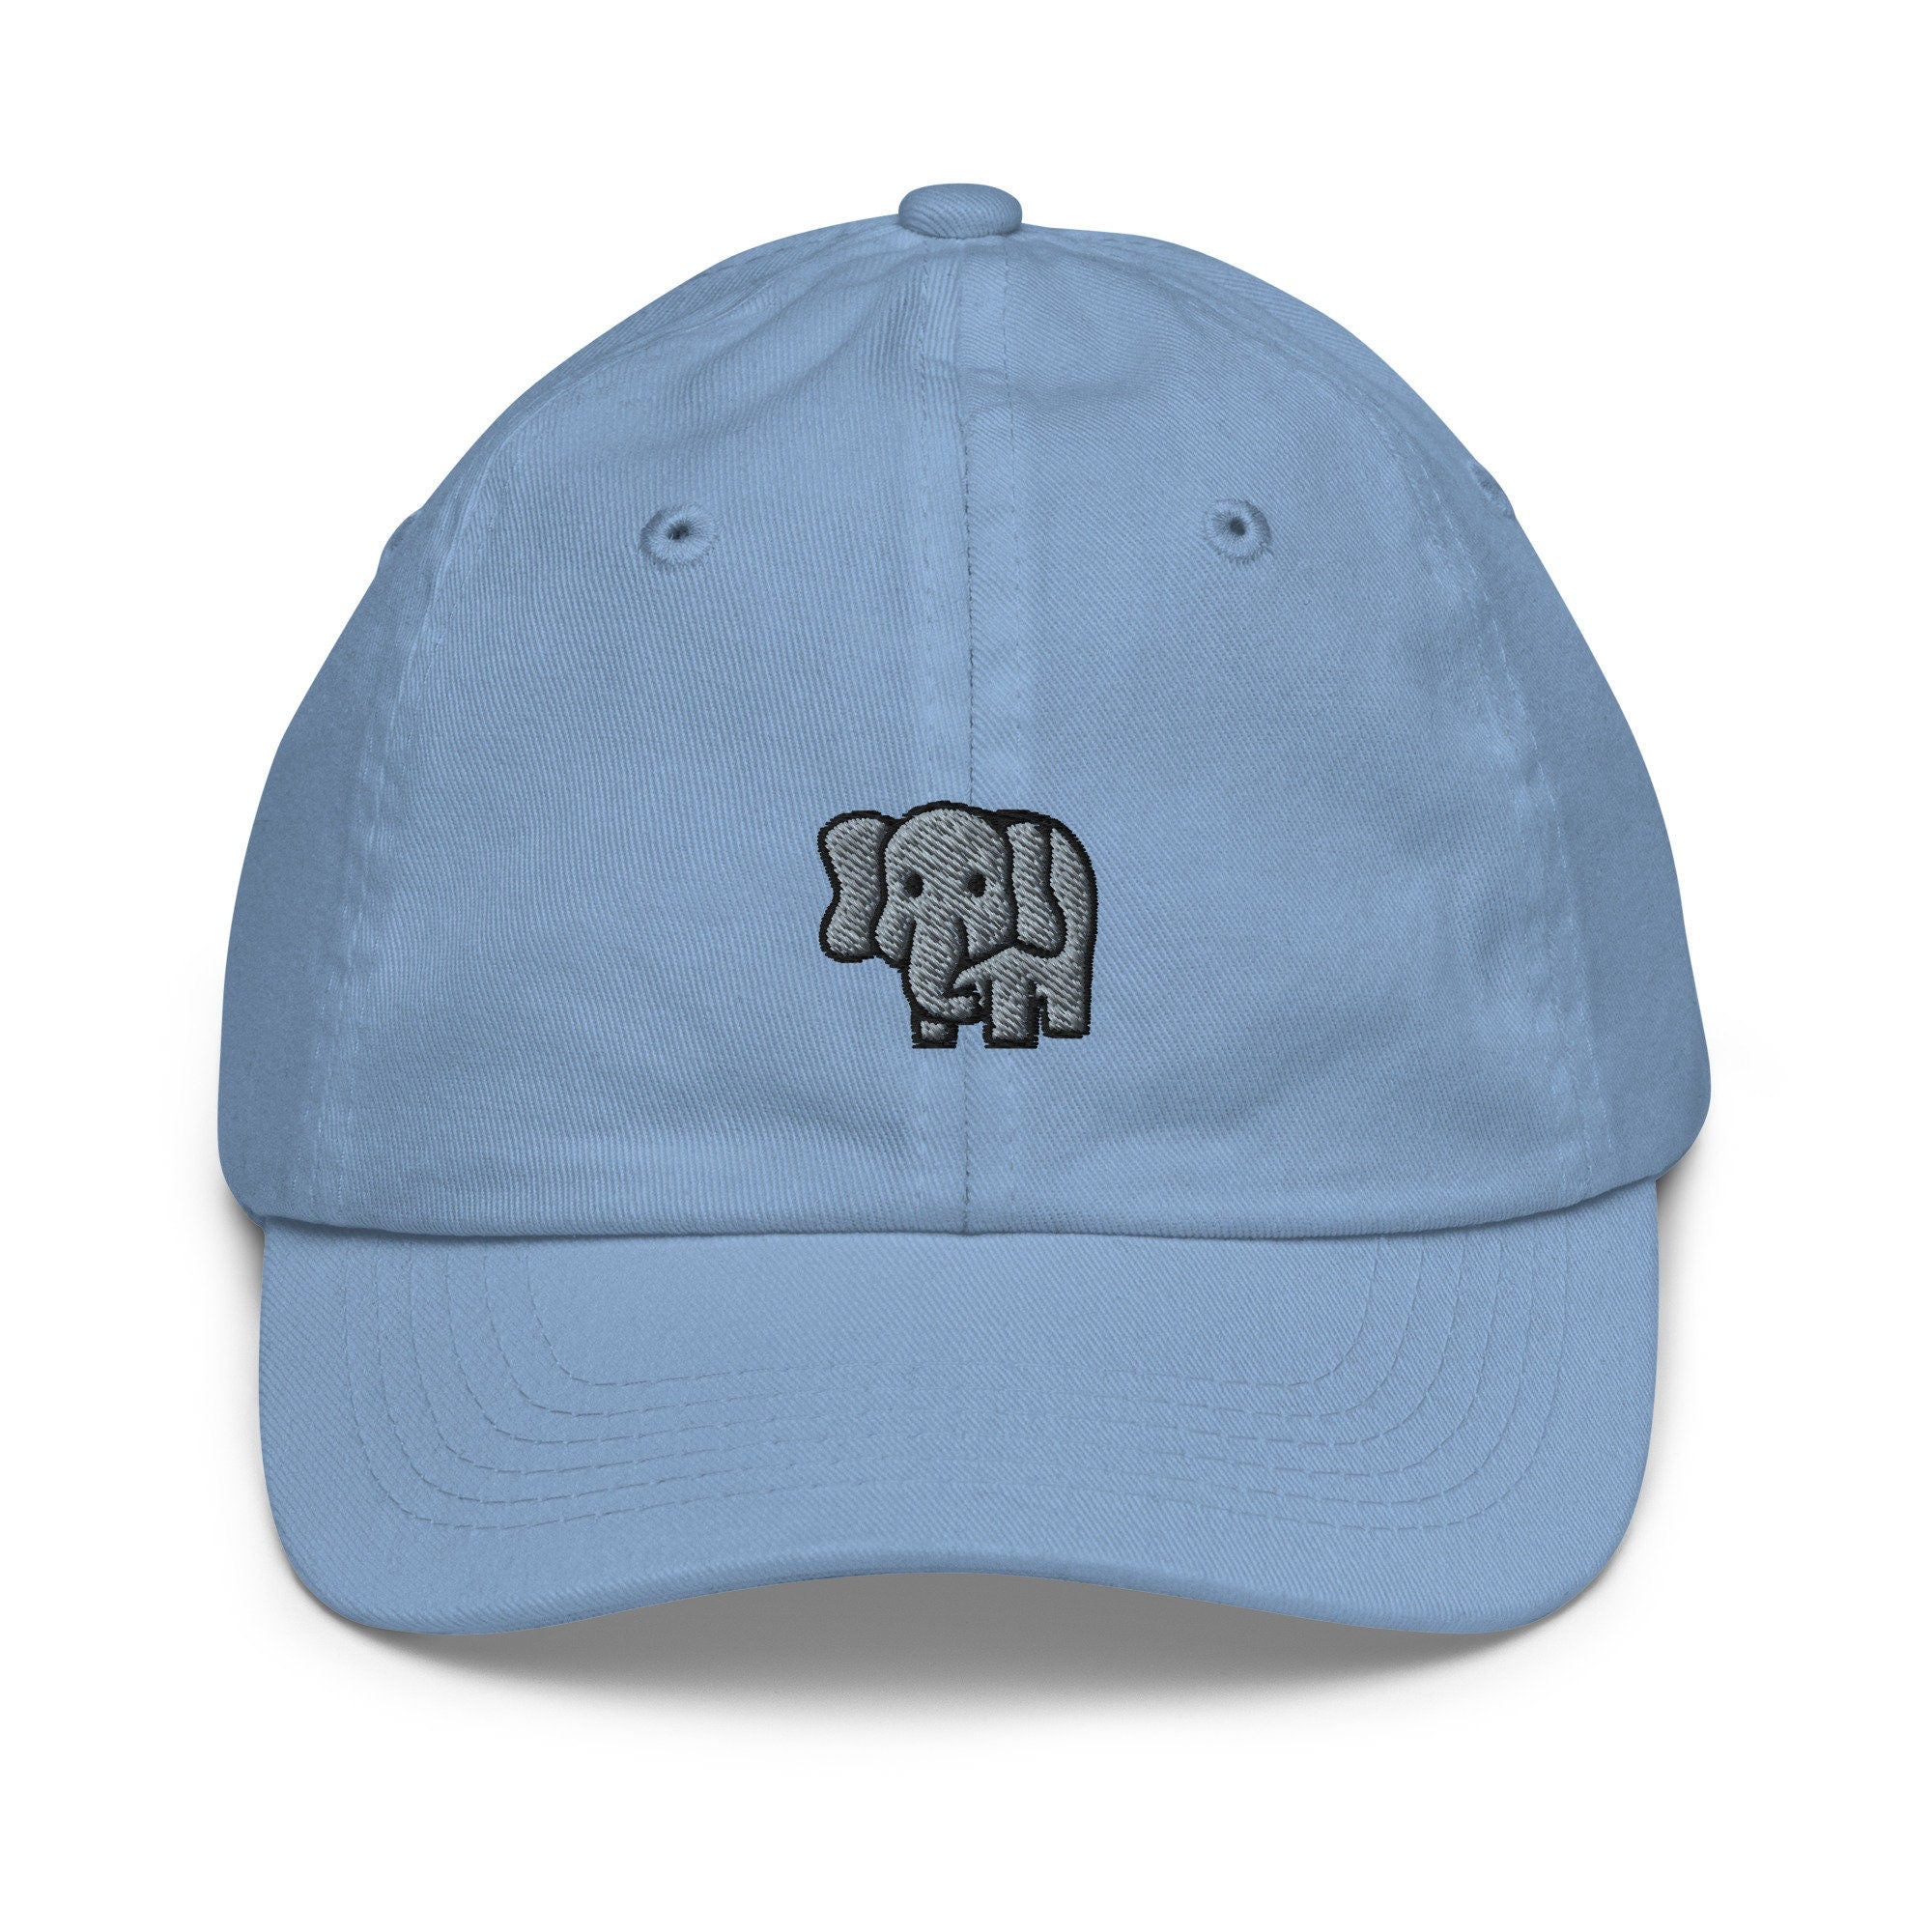 Elephant Youth Baseball Cap, Handmade Kids Hat, Embroidered Childrens Hat Gift - Multiple Colors